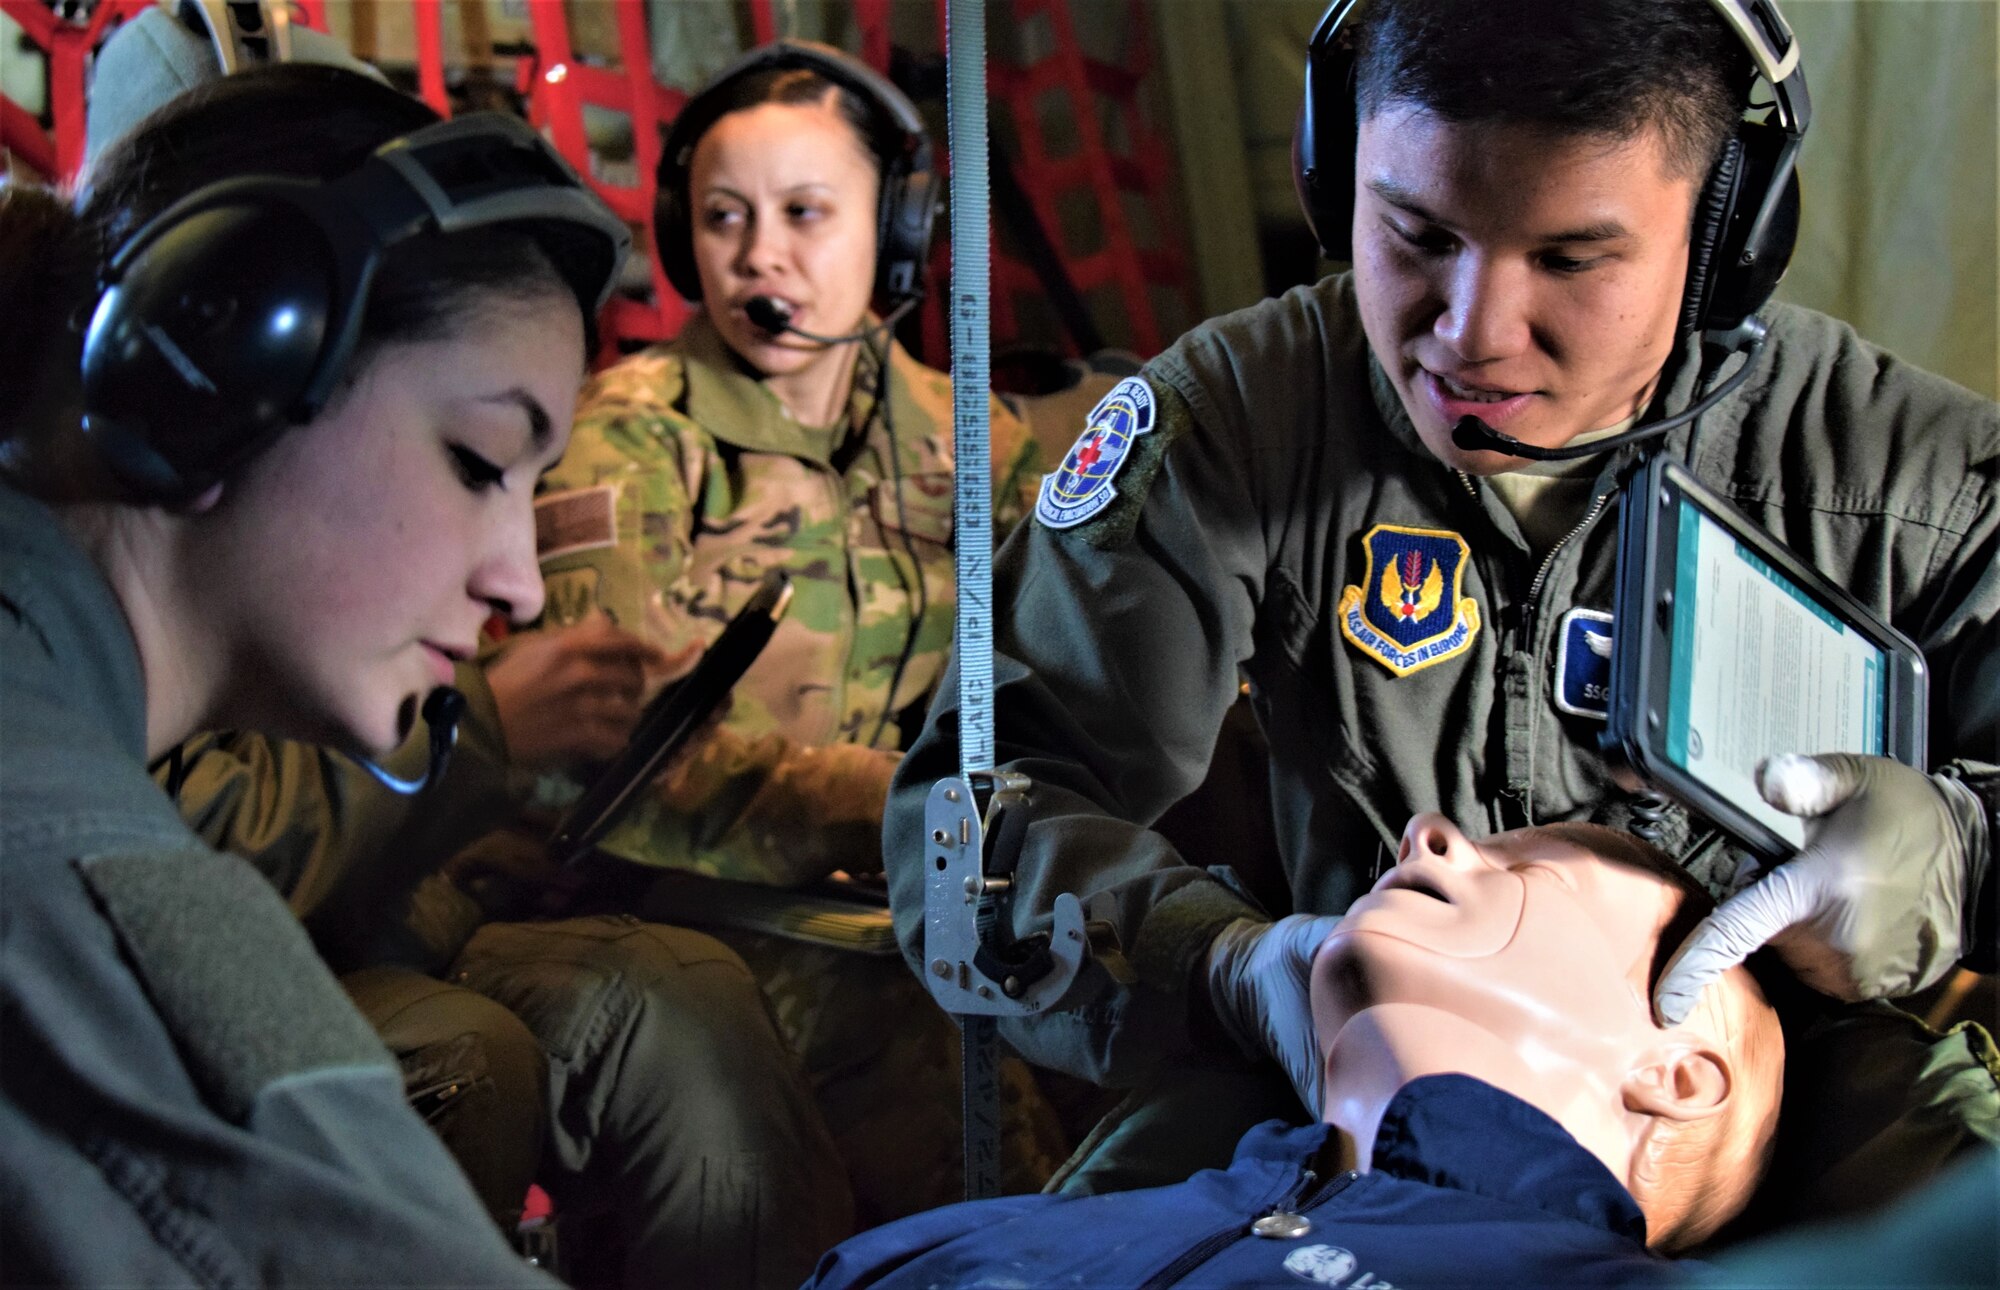 U.S. Air Force personnel on aeromedical training mission.